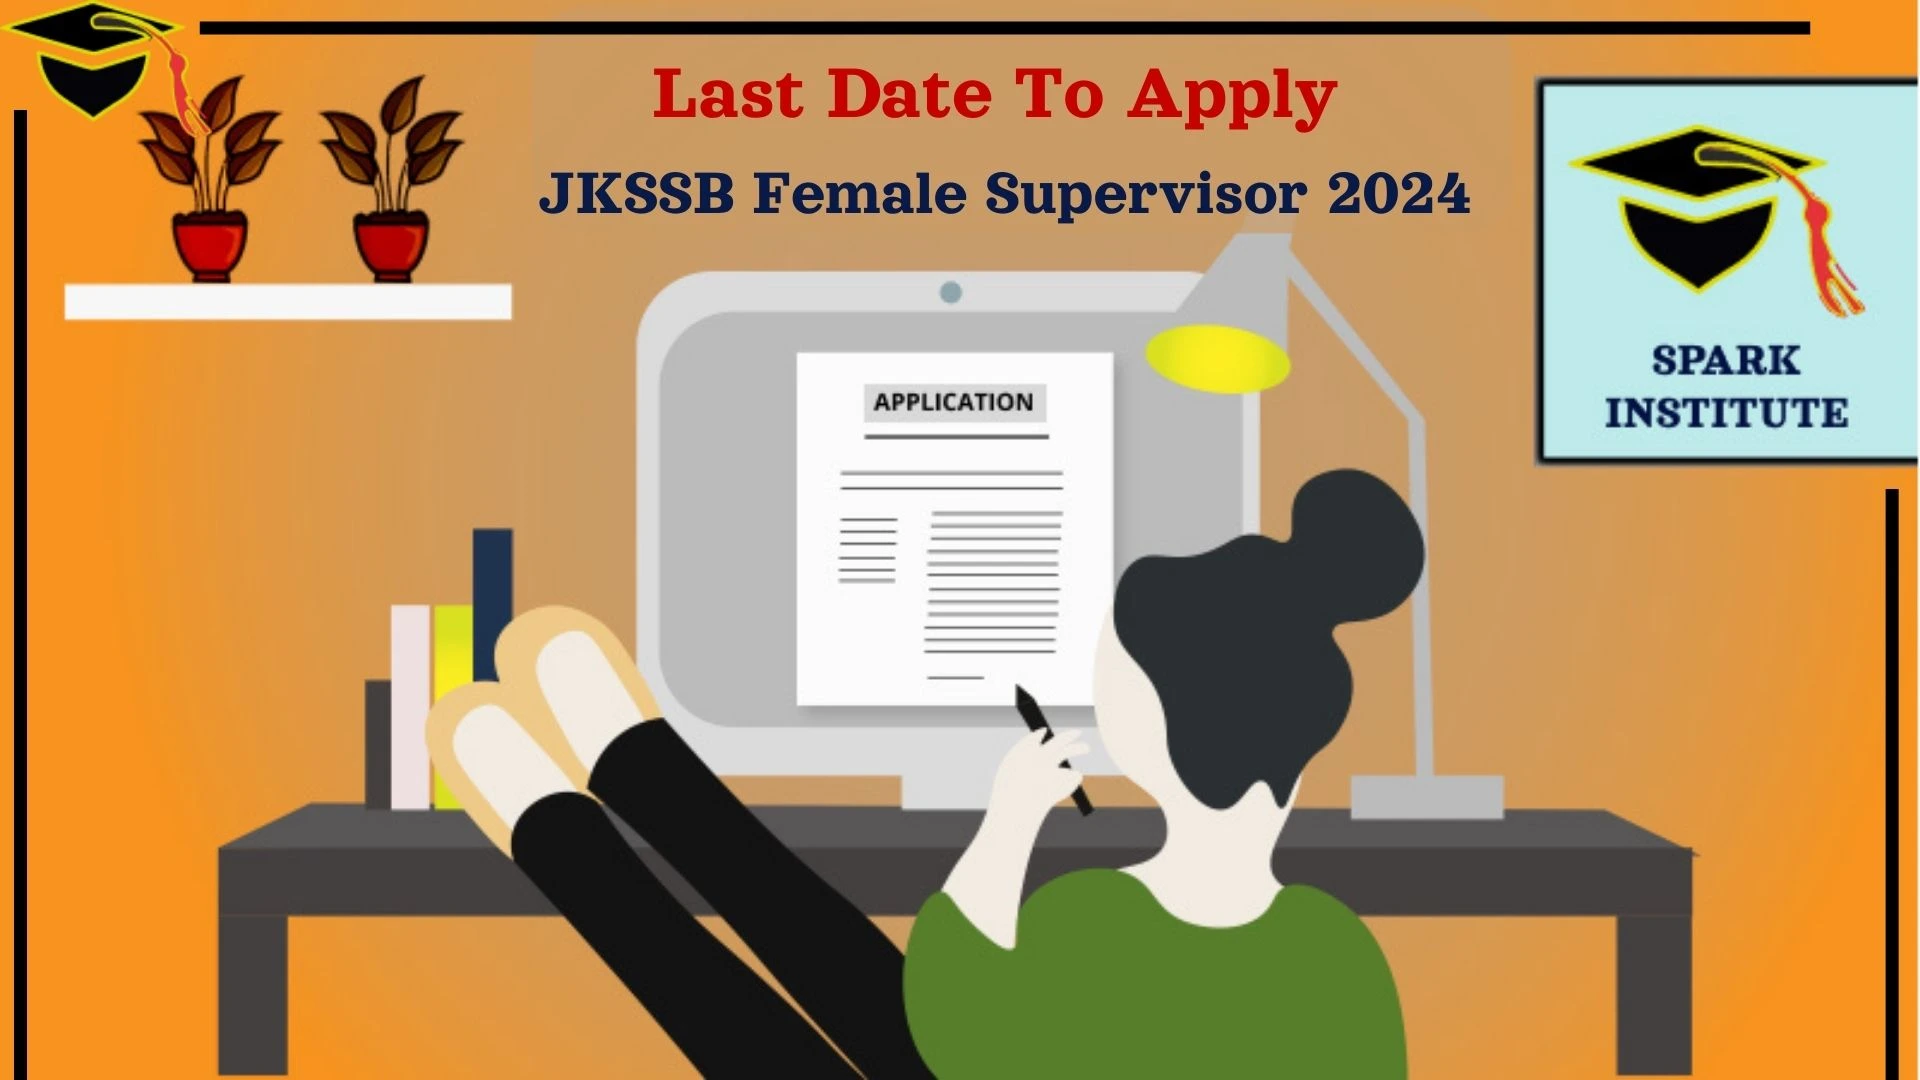 JKSSB Female Supervisor 2024 Last Date to Apply Timeline, Process and